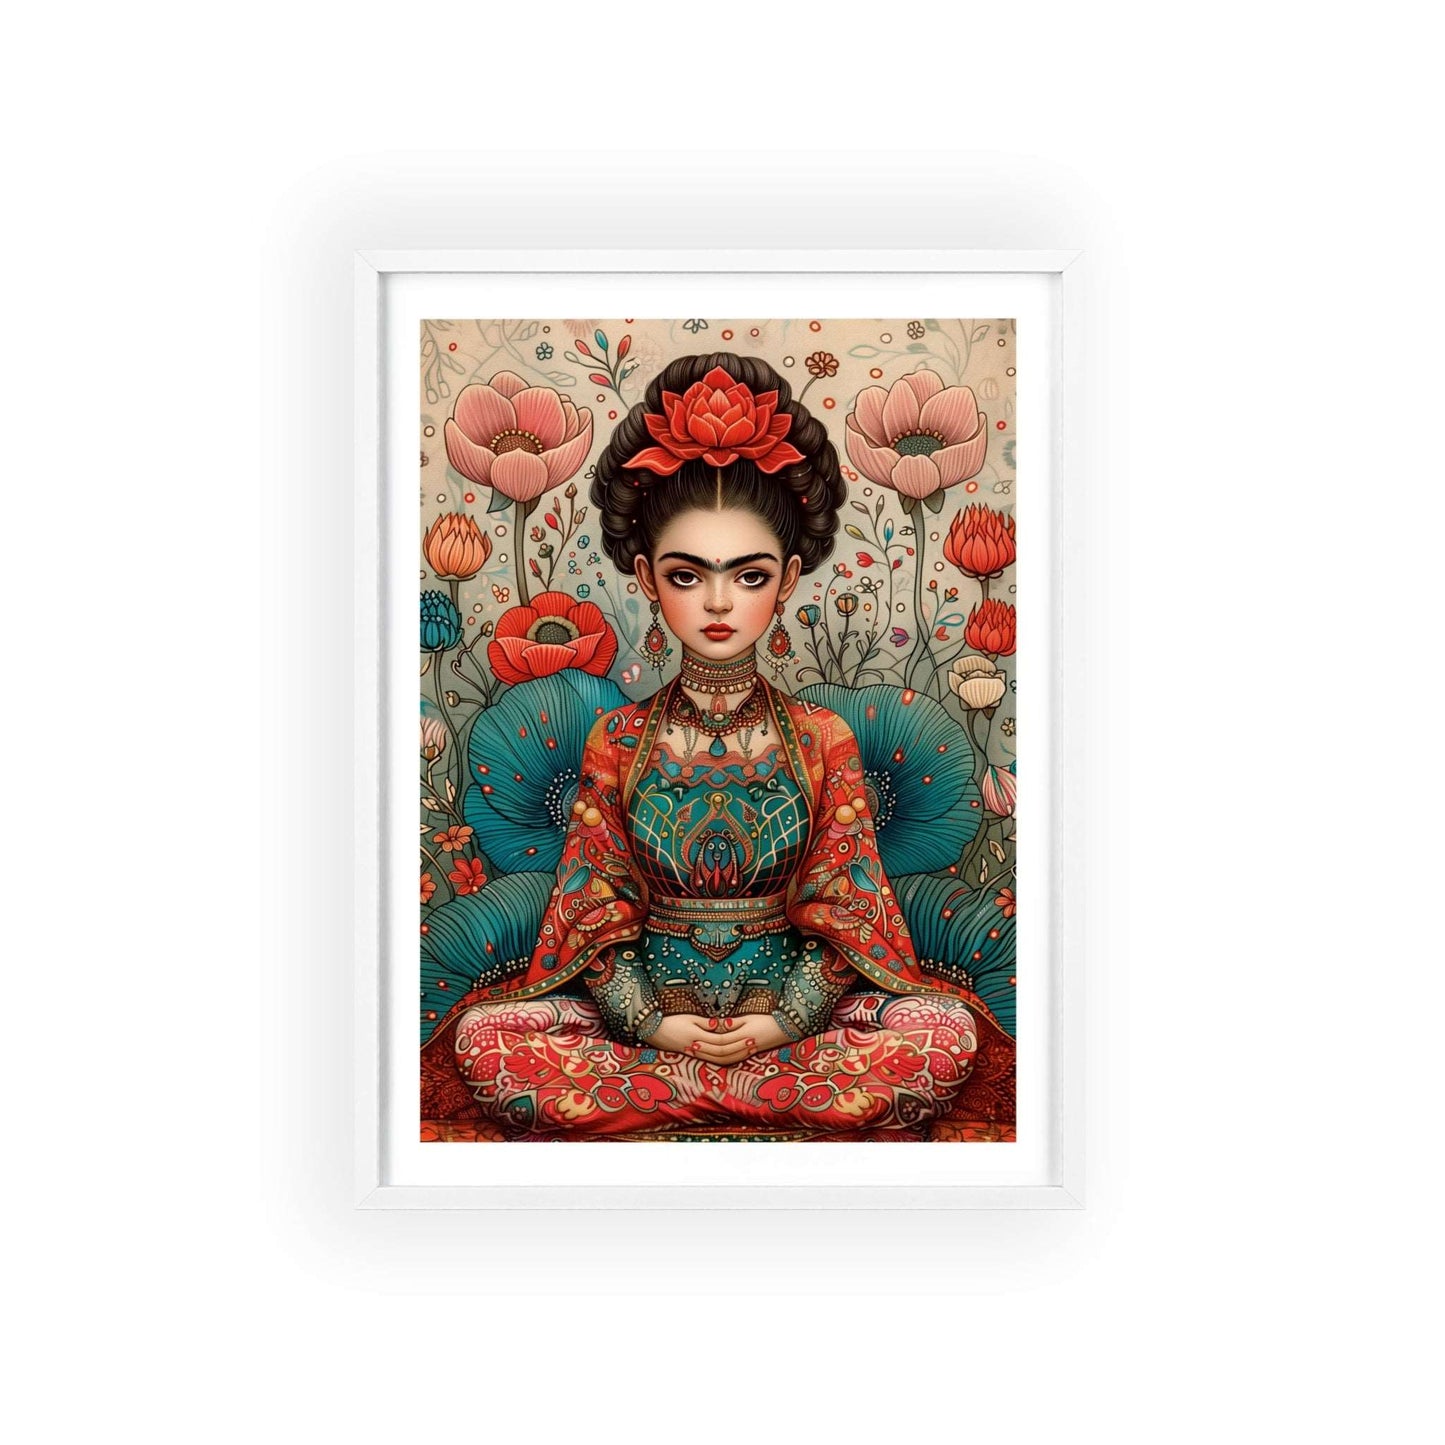 Framed poster featuring a young Frida Kahlo in a meditative pose. She is depicted in a modern vector design with a muted color palette.